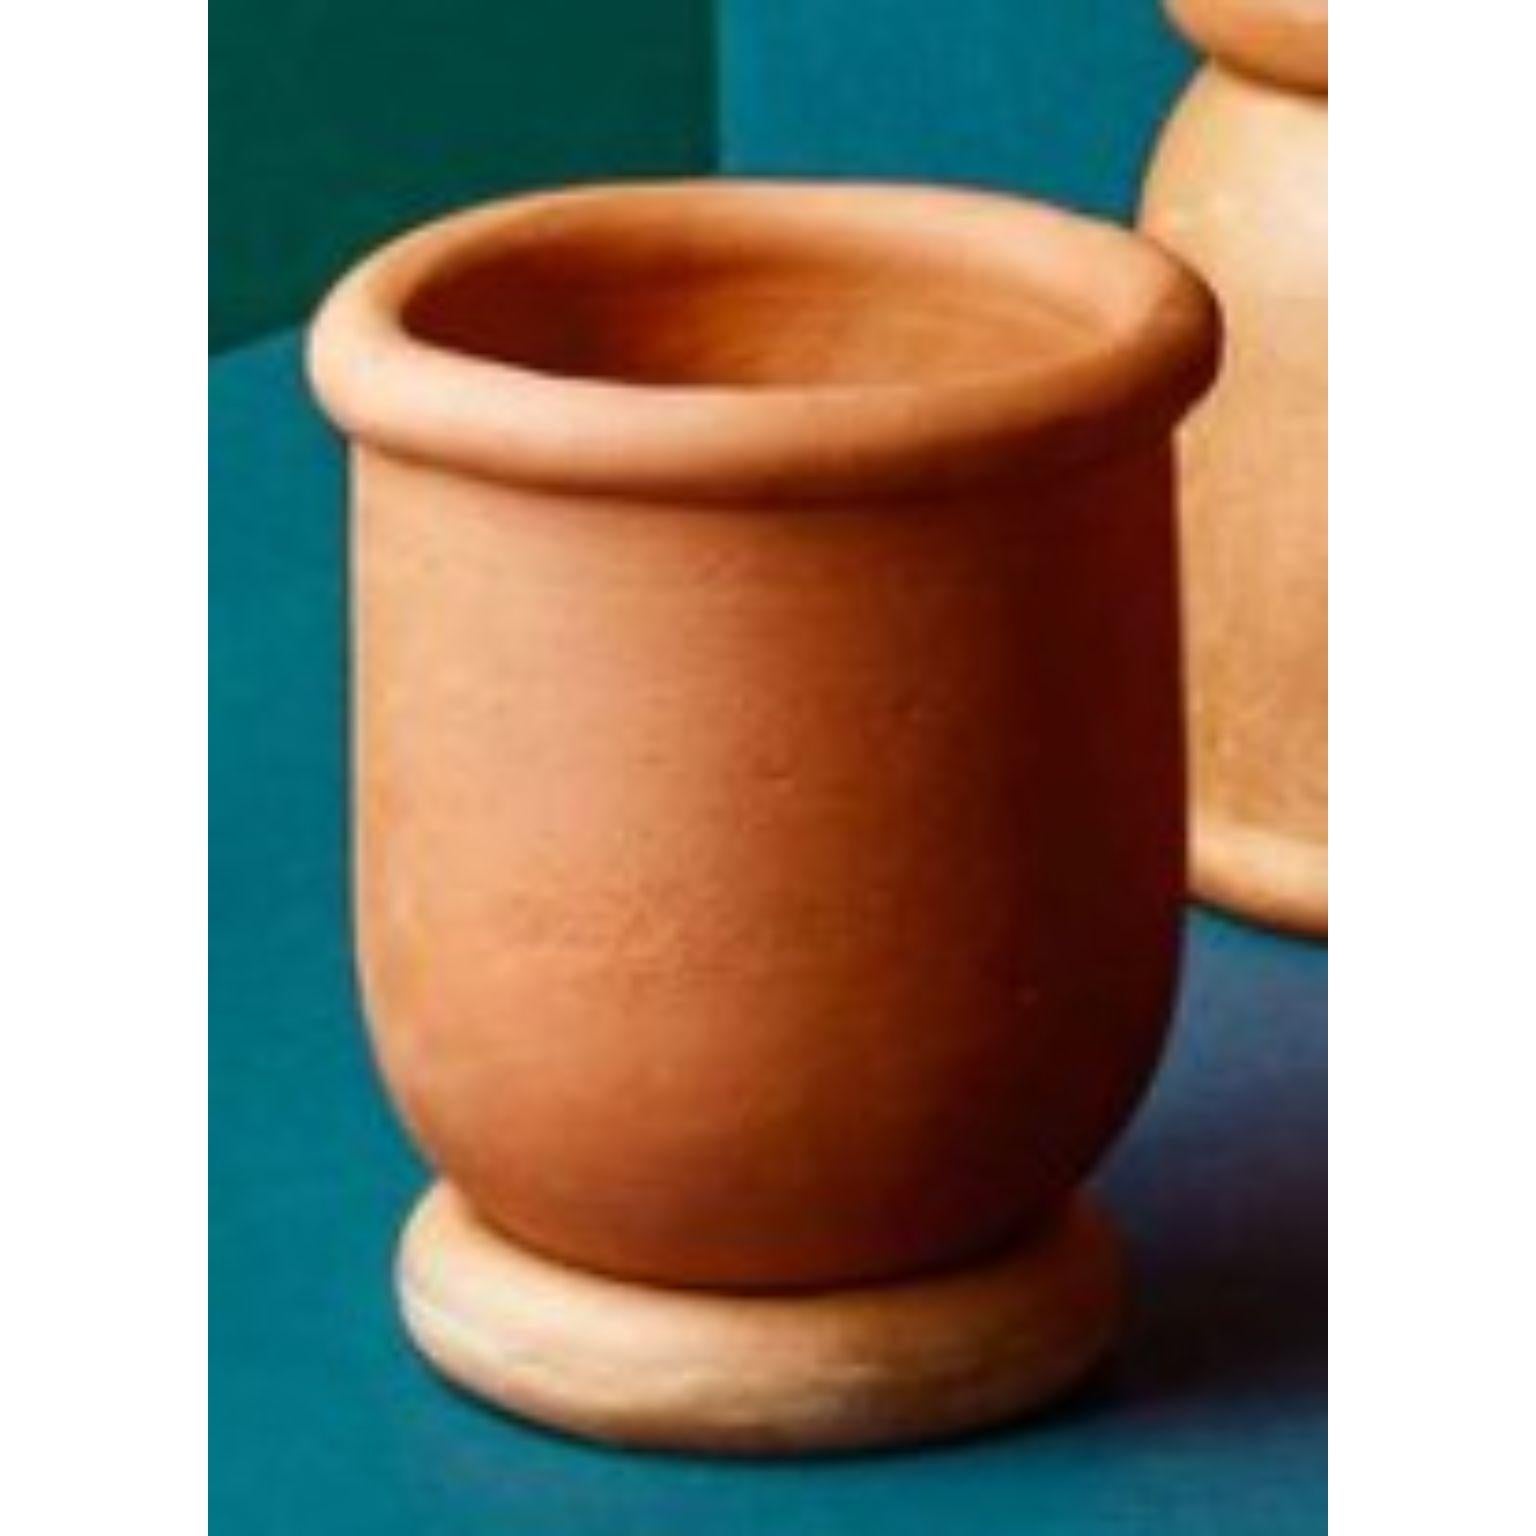 Mix & Match small vase by Tero Kuitunen
Material: Handbuild terracotta.
Dimensions: D17 x H22 cm
Also Available: Two different Size that can be compiled in many ways.

Handbuild terracotta planters. Open edition

Designer Tero Kuitunen, b.